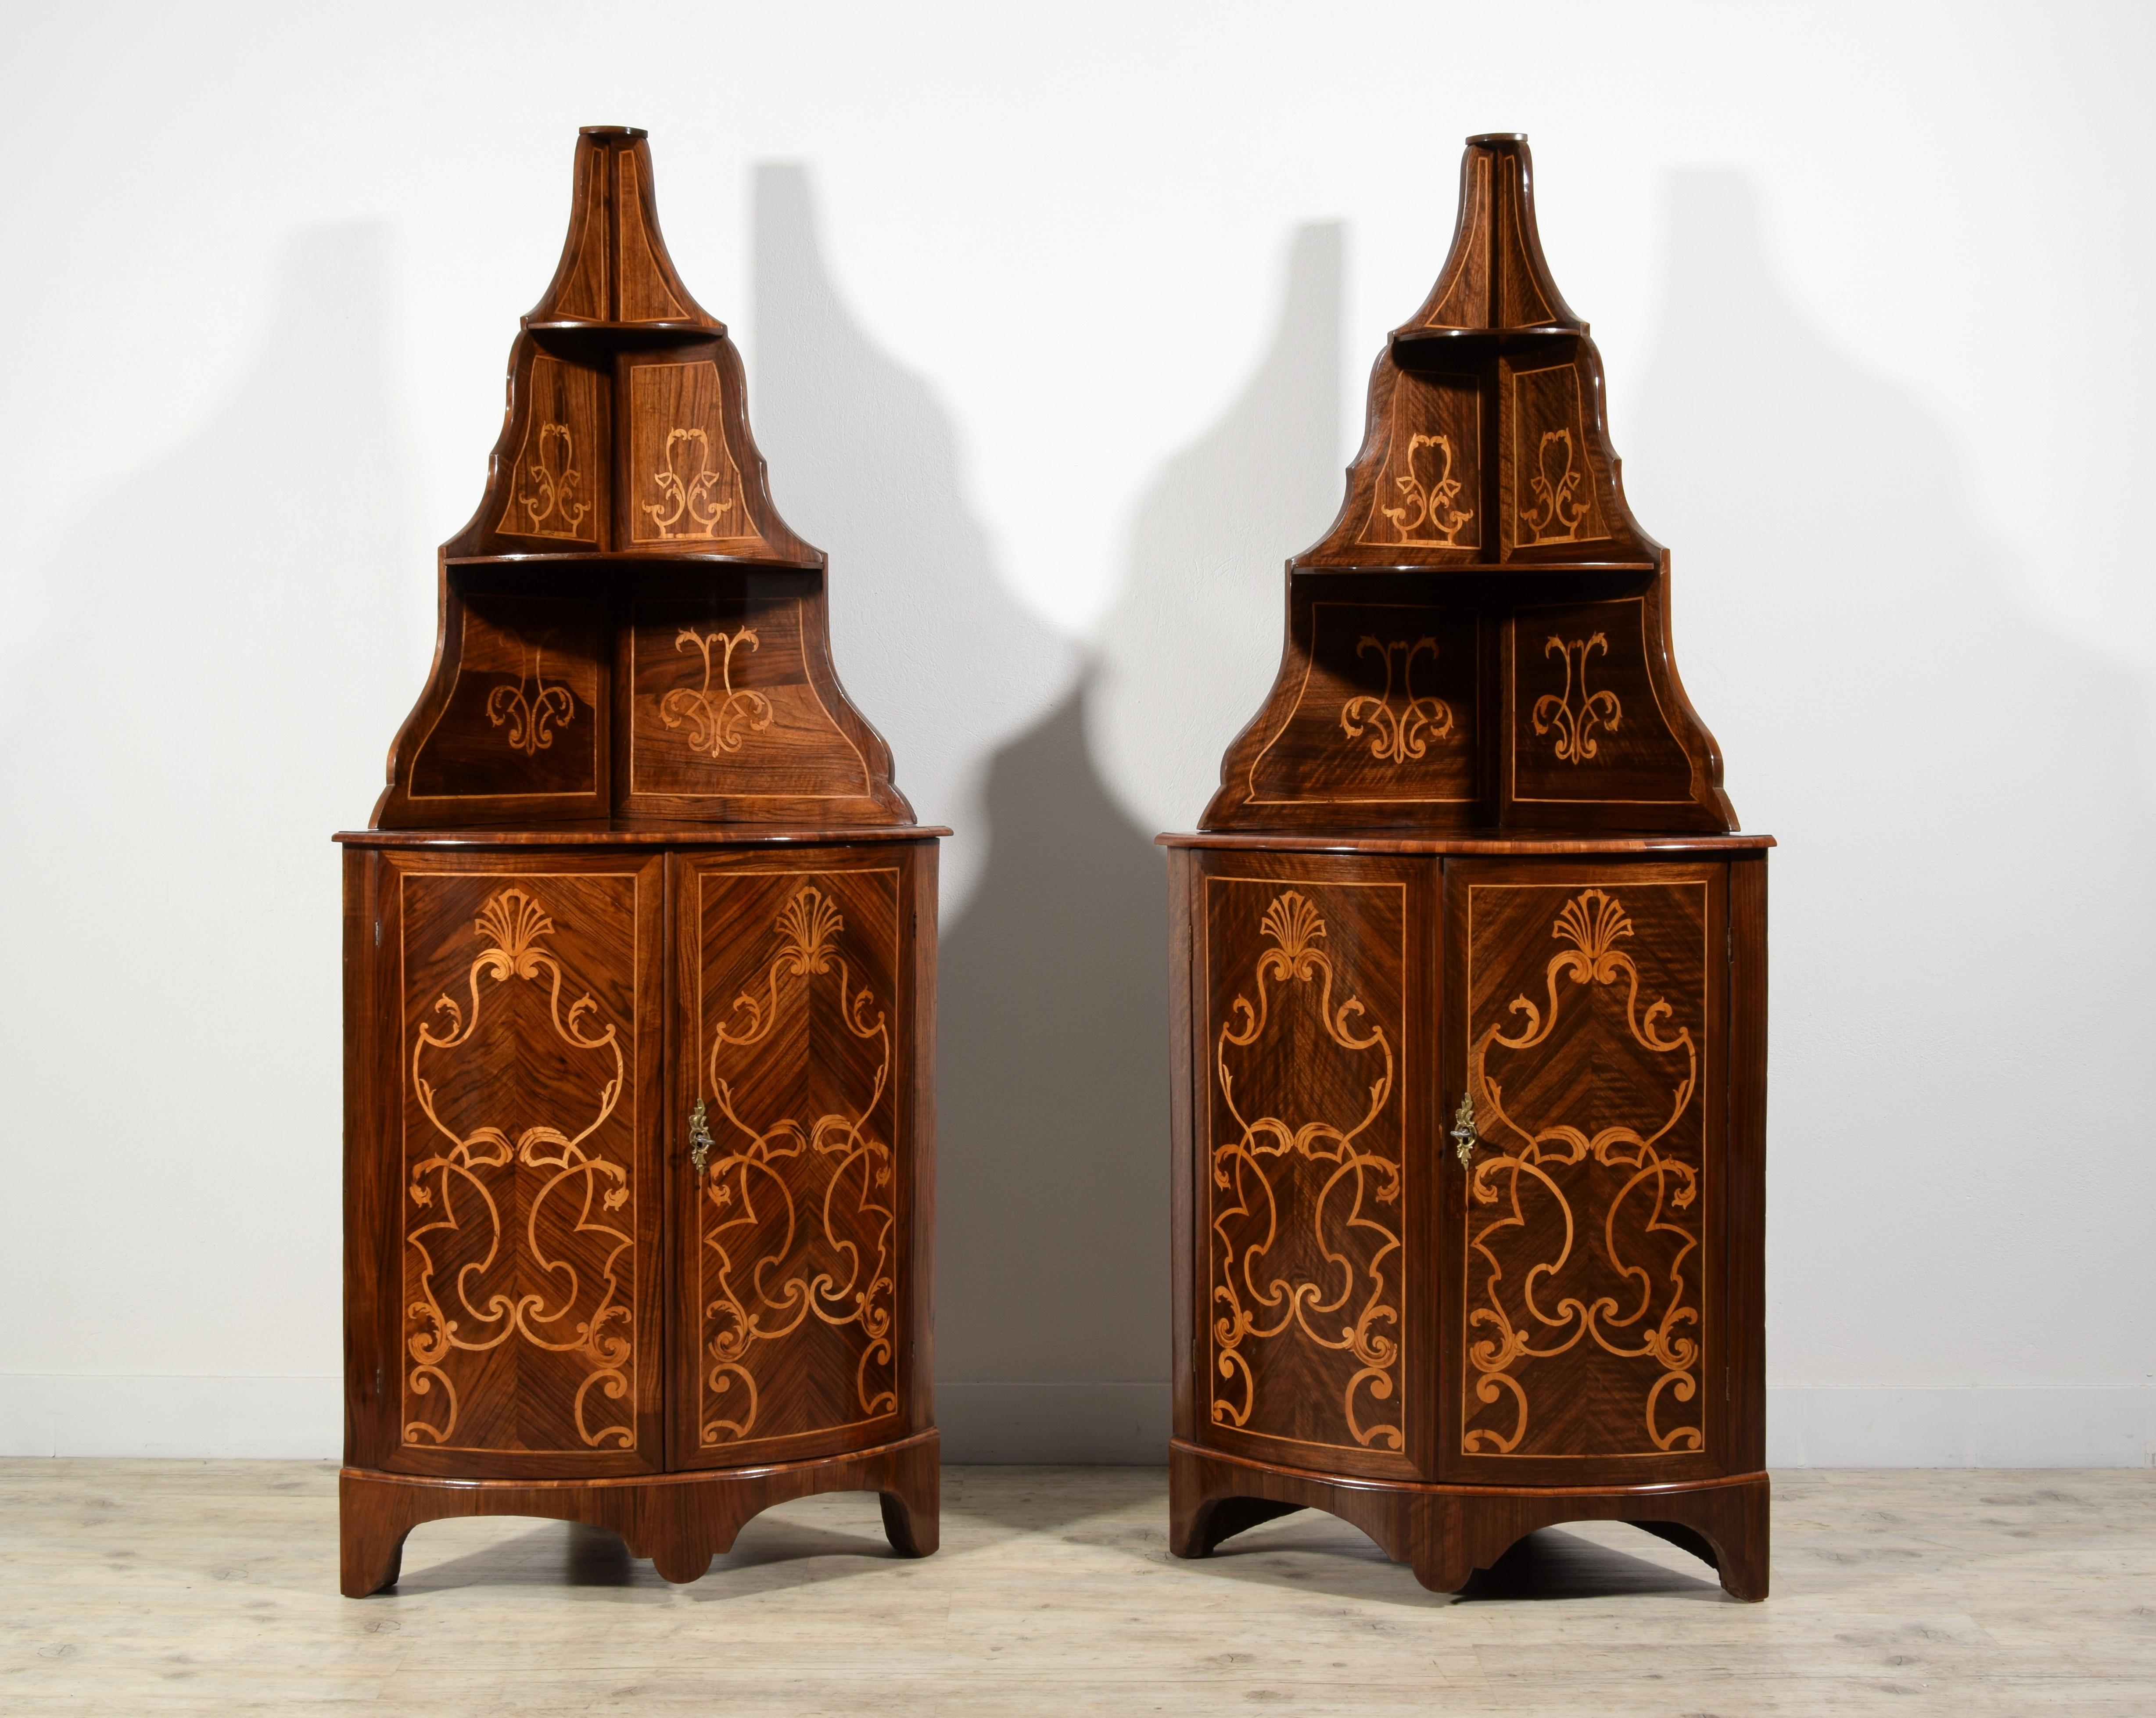 18th century, Pair of Italian Inlay Wood Corner Cabinets 
Measurements: cm H maximum 183 cm x D 56; top H 92 cm
This refined pair of corner cabinets was made in Piedmont around the middle of the 18th century.
The wooden structure is veneered in